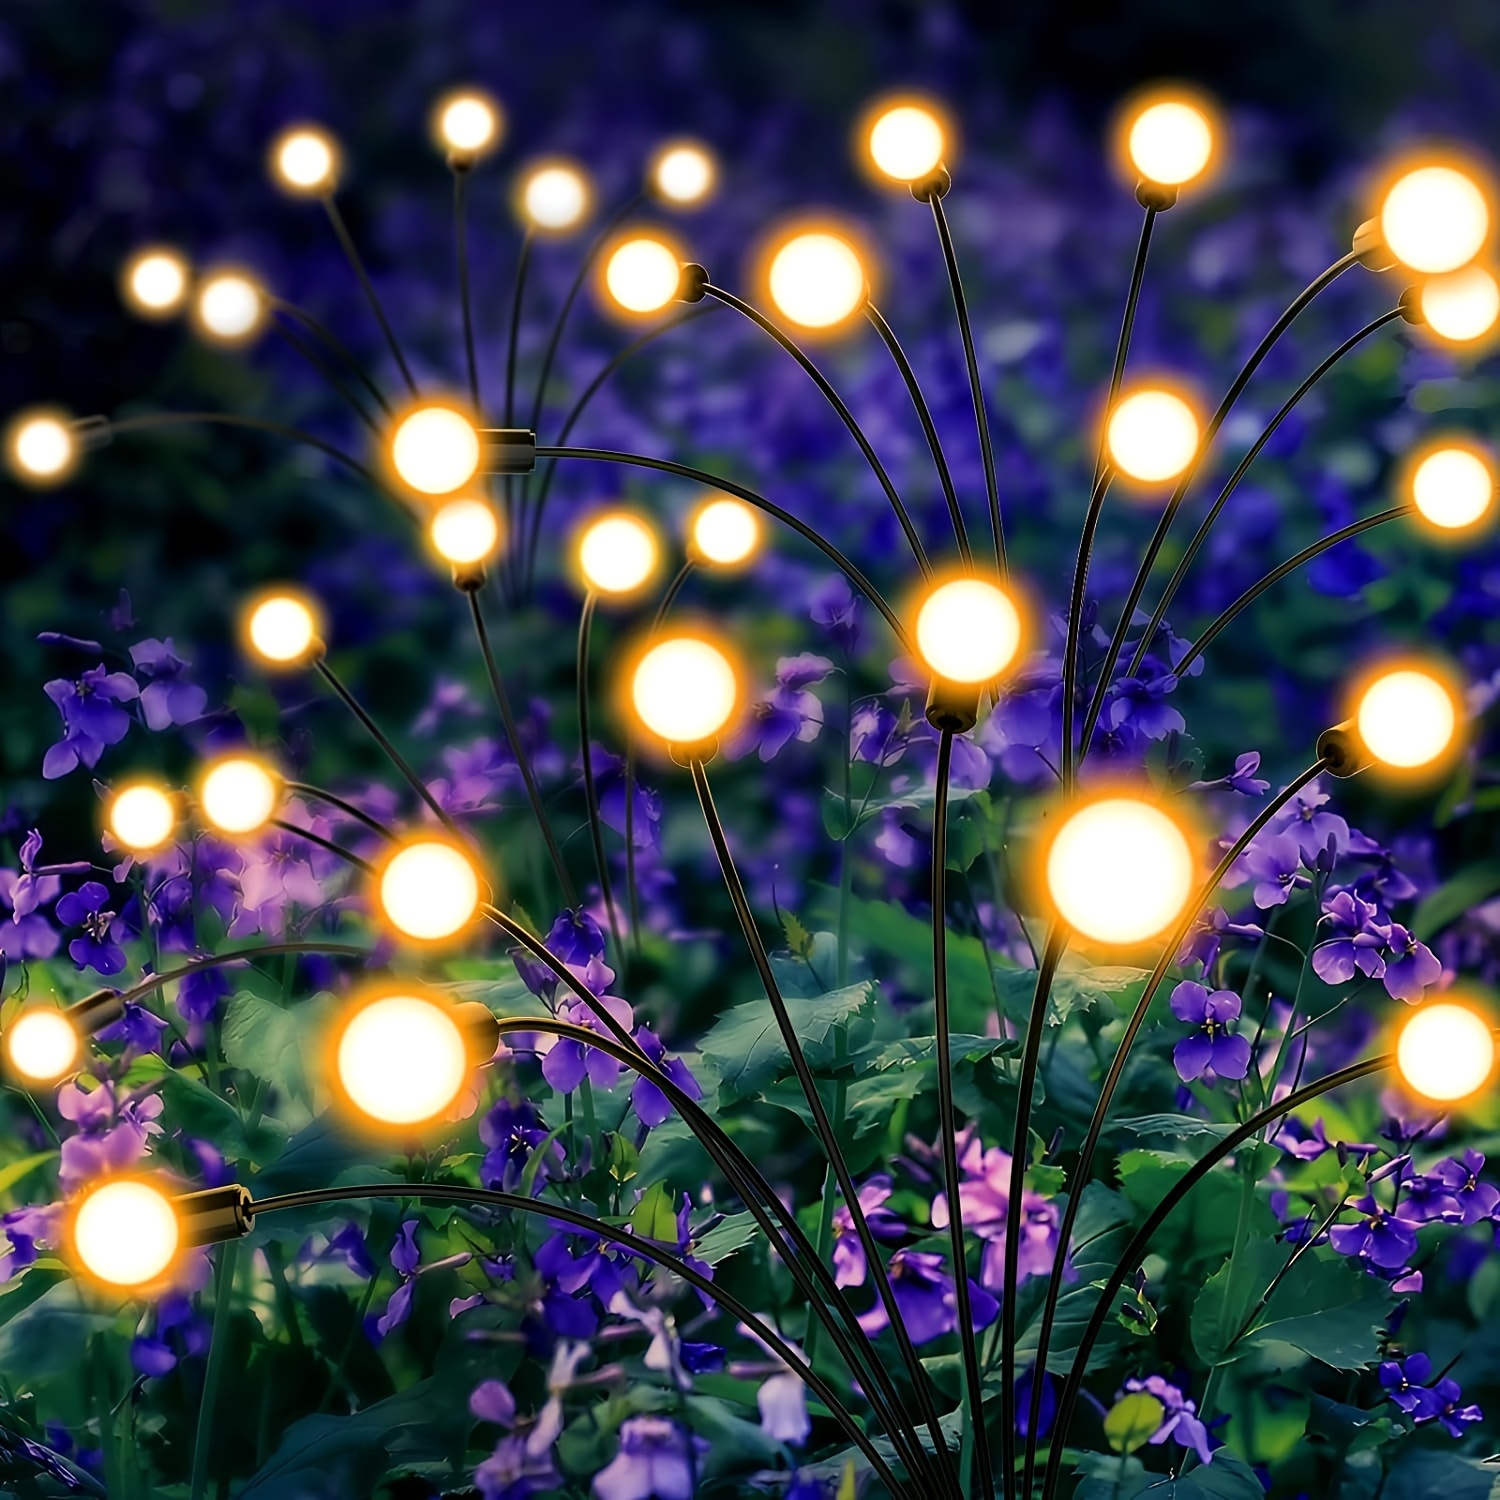 

4 Pack 32 Lights Solar Firefly Lights, Starburst Swaying Lights, Outdoor Garden Decorations For Yard Patio Pathway Lawn, Gardening Gifts